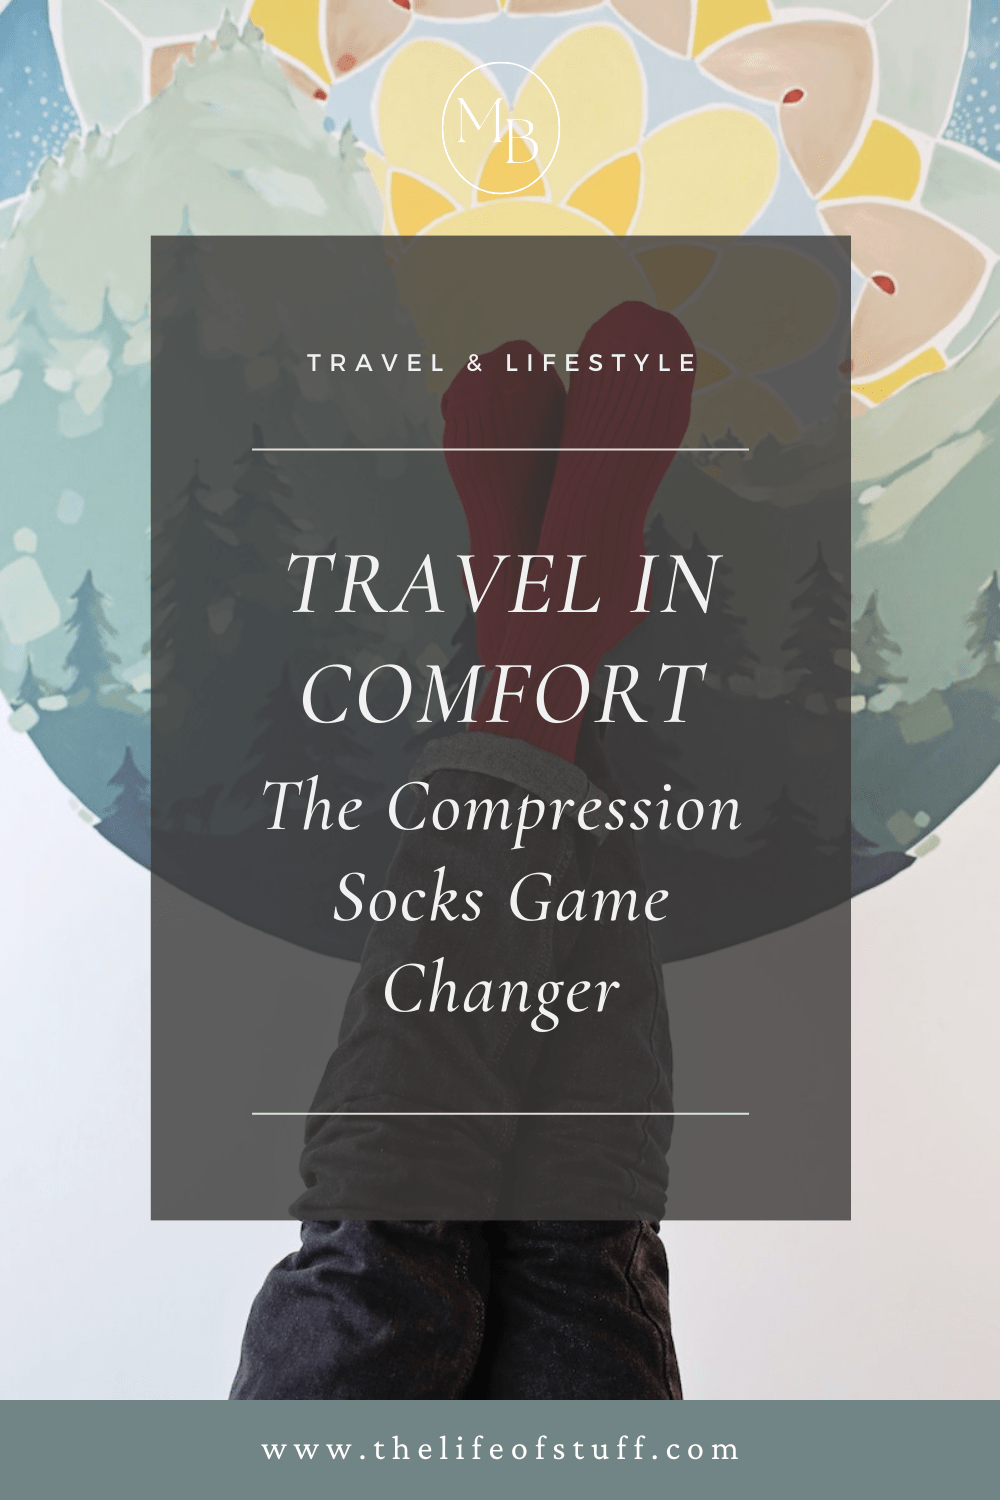 Travel in Comfort - The Compression Socks Game Changer - The Life of Stuff